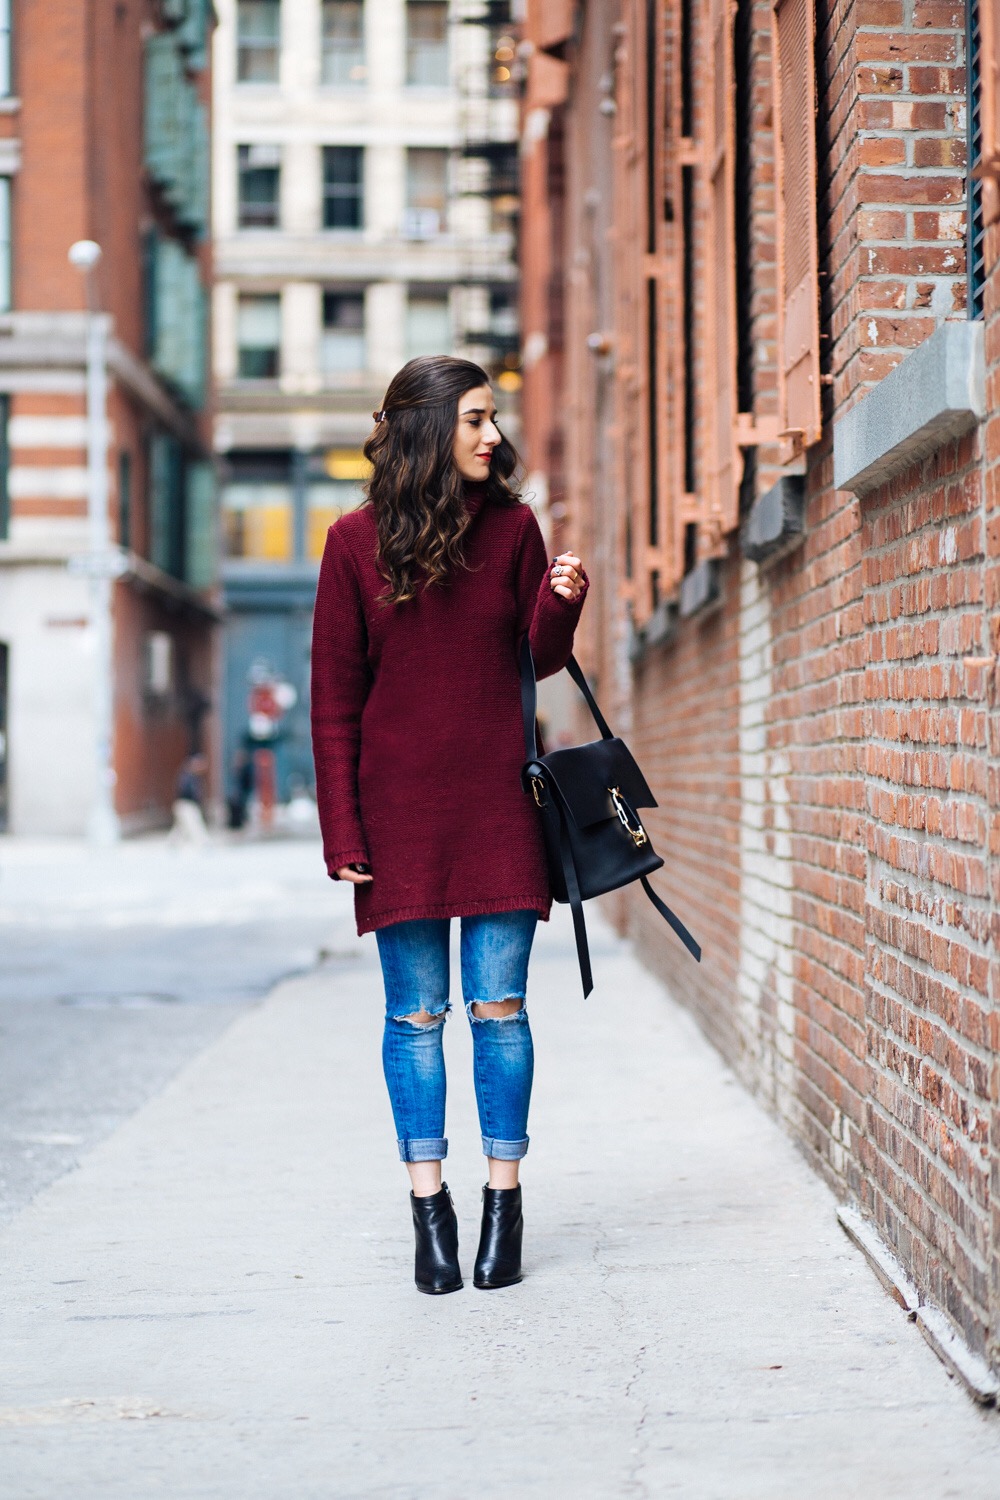 sweater dress with jeans